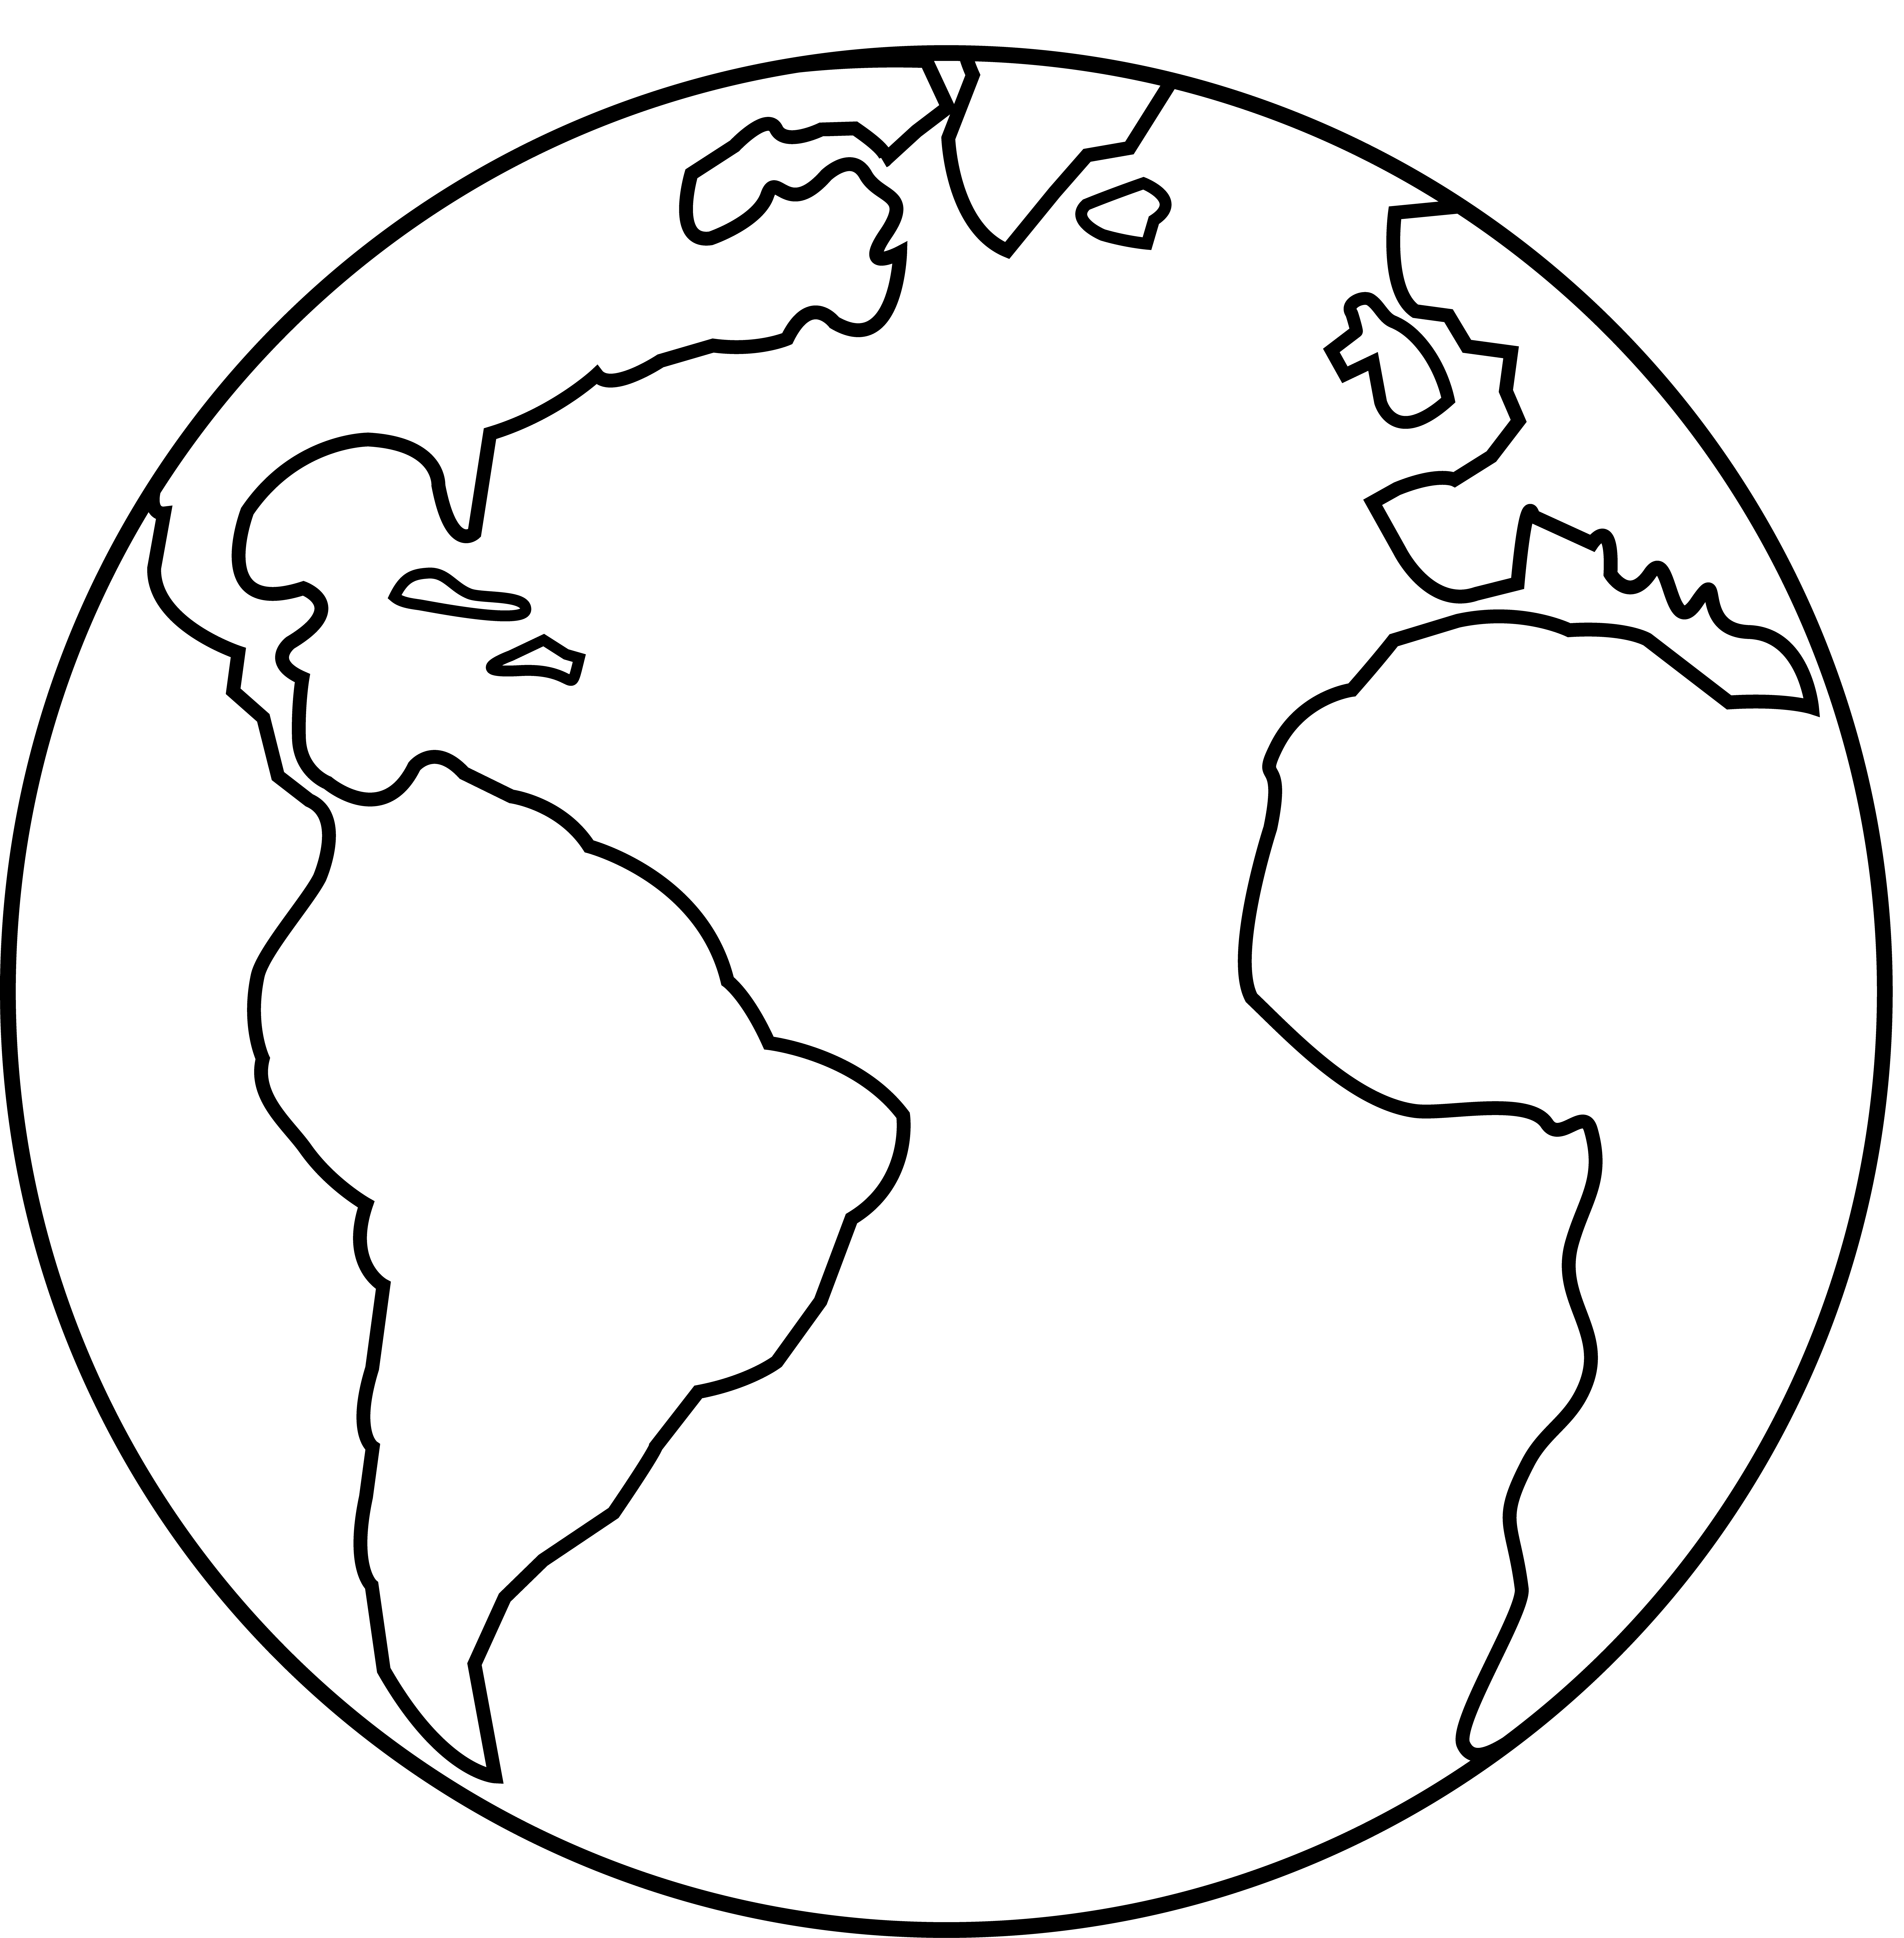 Line art geography pinterest. Life clipart earth planet drawing